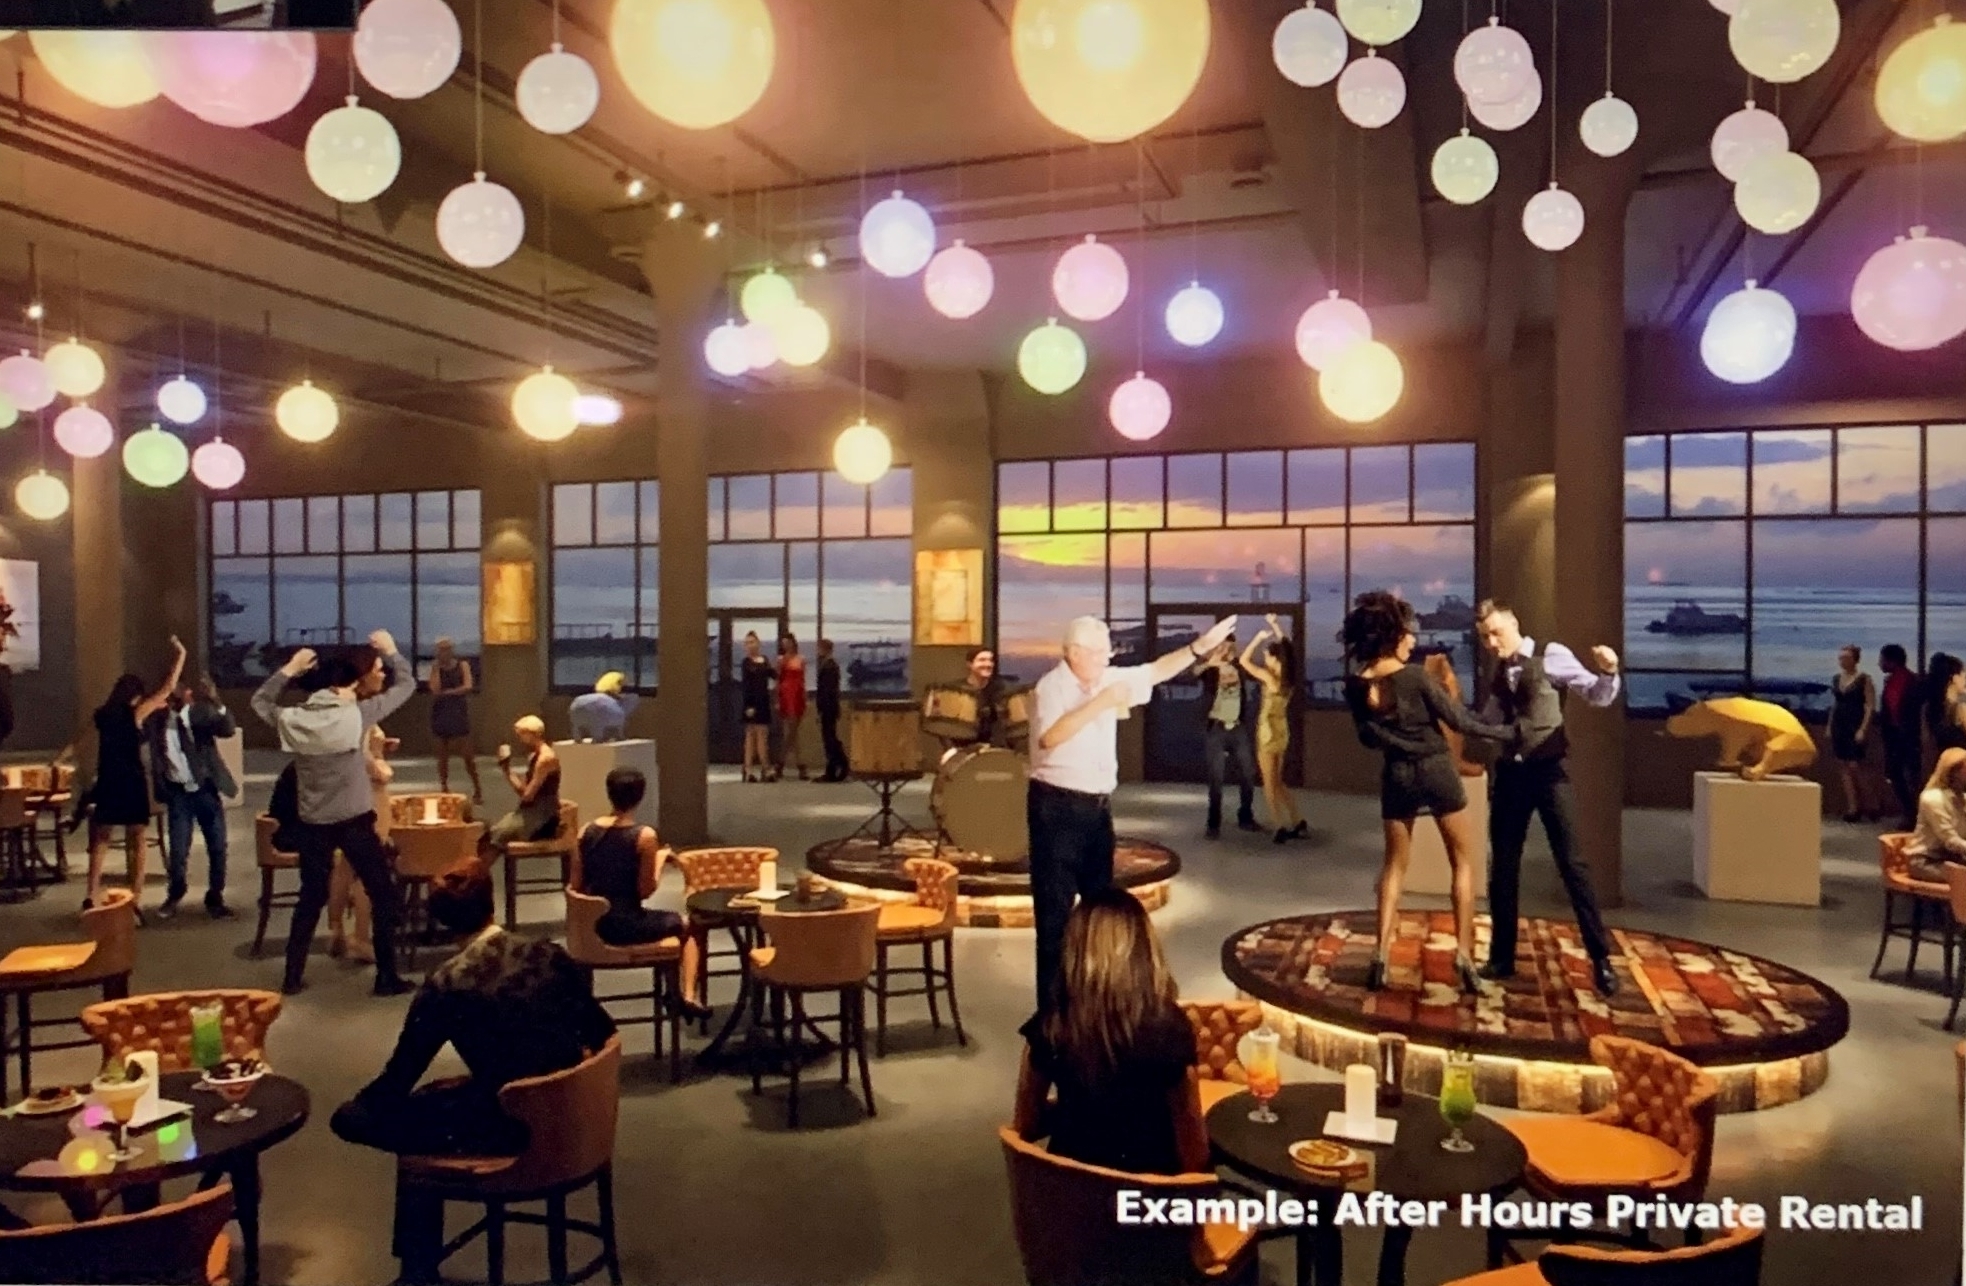 Architectural rendition of potential event rental space in redesigned Torpedo Factory. (Image: City of Alexandria)